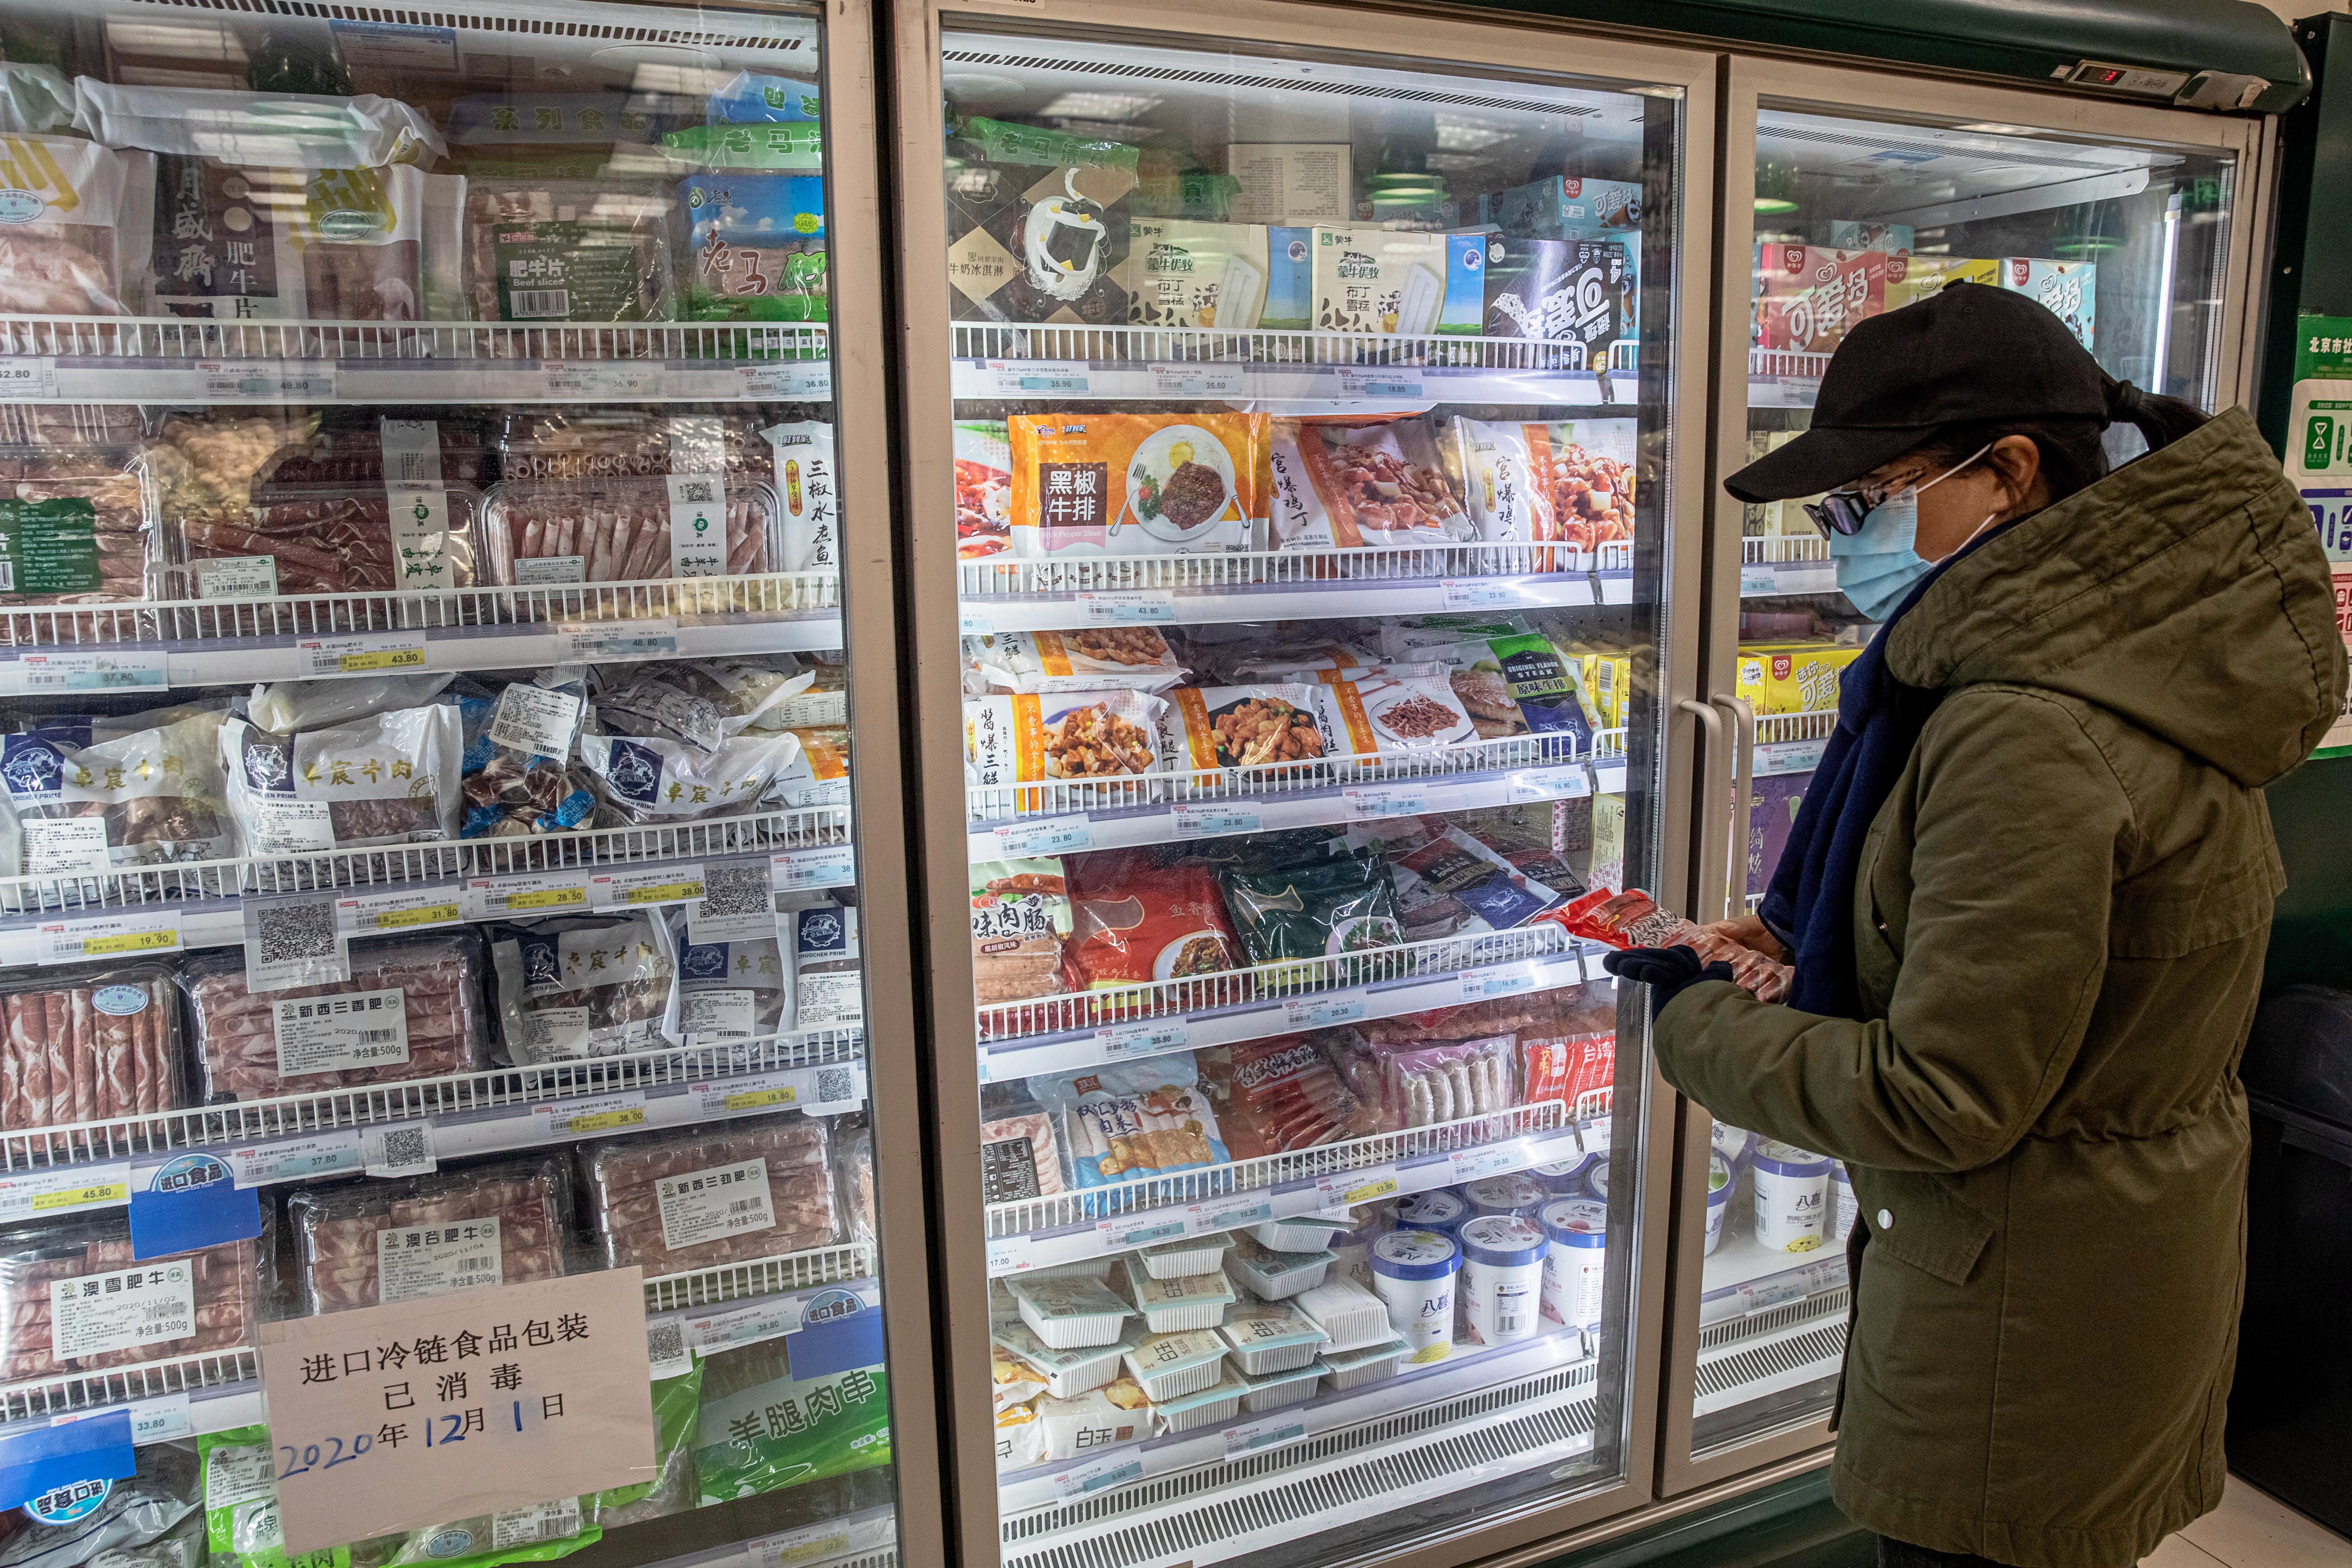 Chinese researchers are investigating if radiation can be used to kill the coronavirus on frozen food. Photo: EPA-EFE